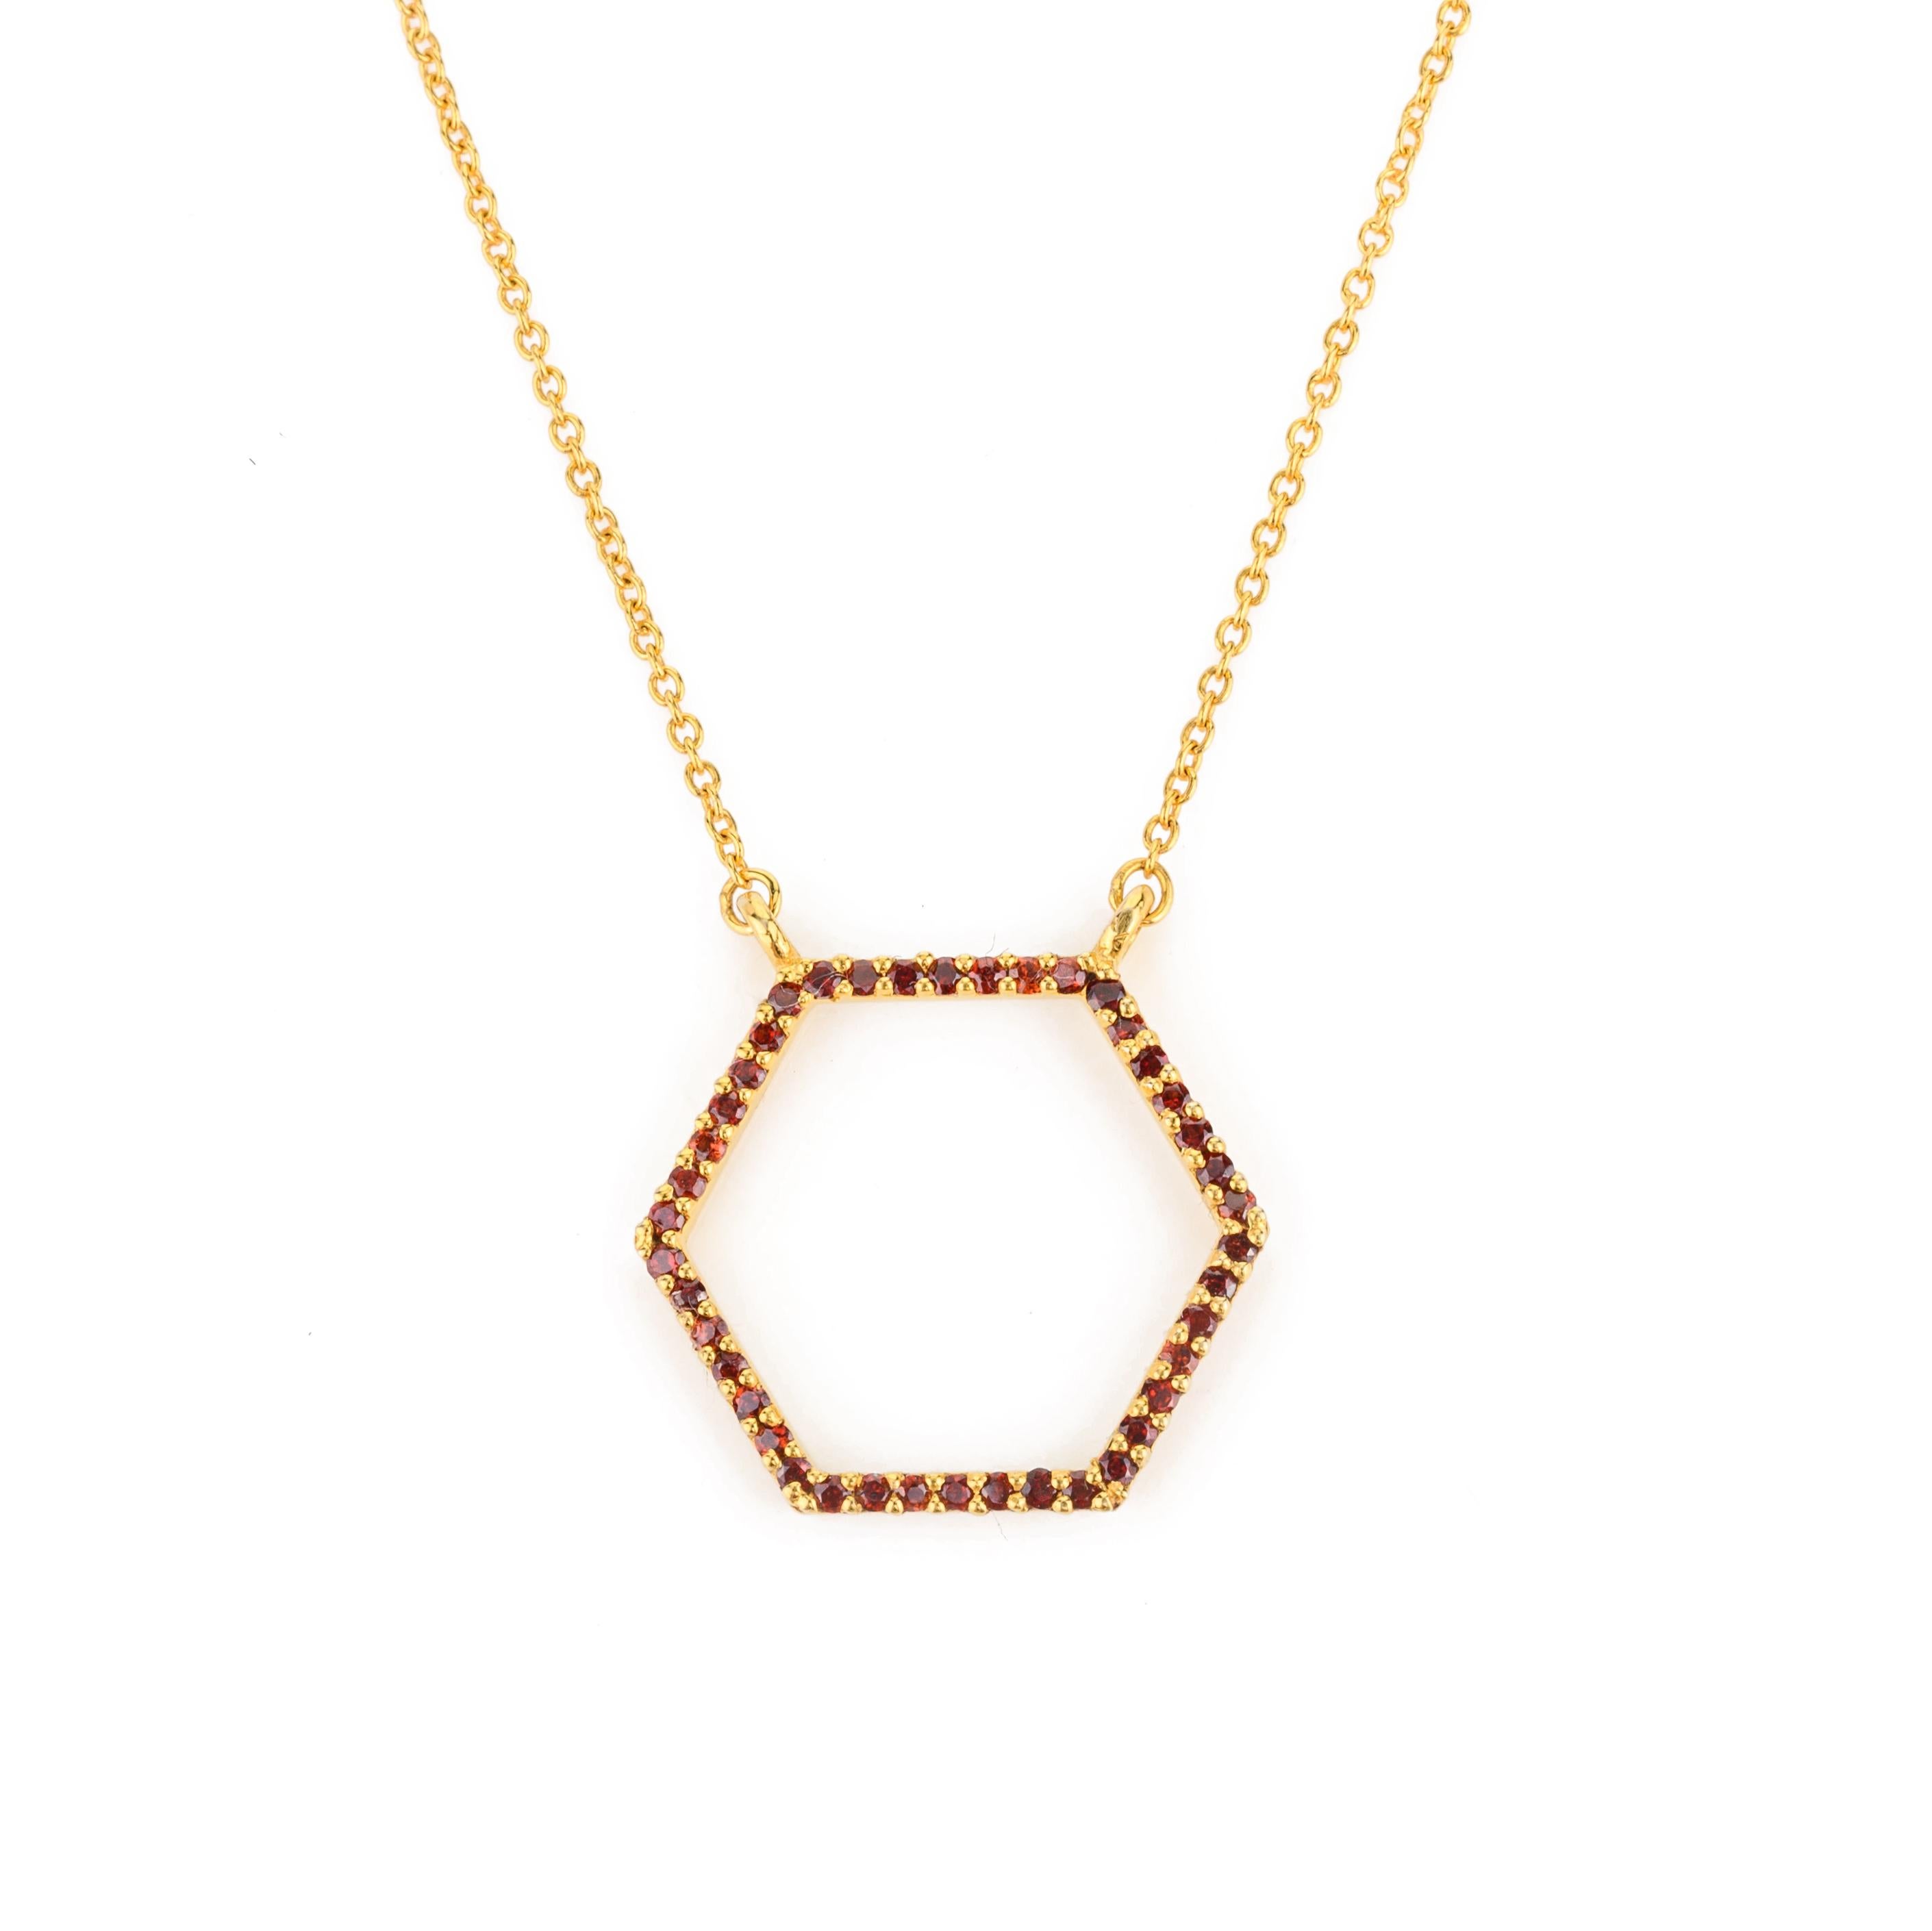 January Birthstone Garnet Hexagon Pendant Chain Necklace in 14K Gold with round cut garnet. This stunning piece of jewelry instantly elevates a casual look or dressy outfit. 
Garnet gemstone restores balance.
Designed with round cut garnet pave set